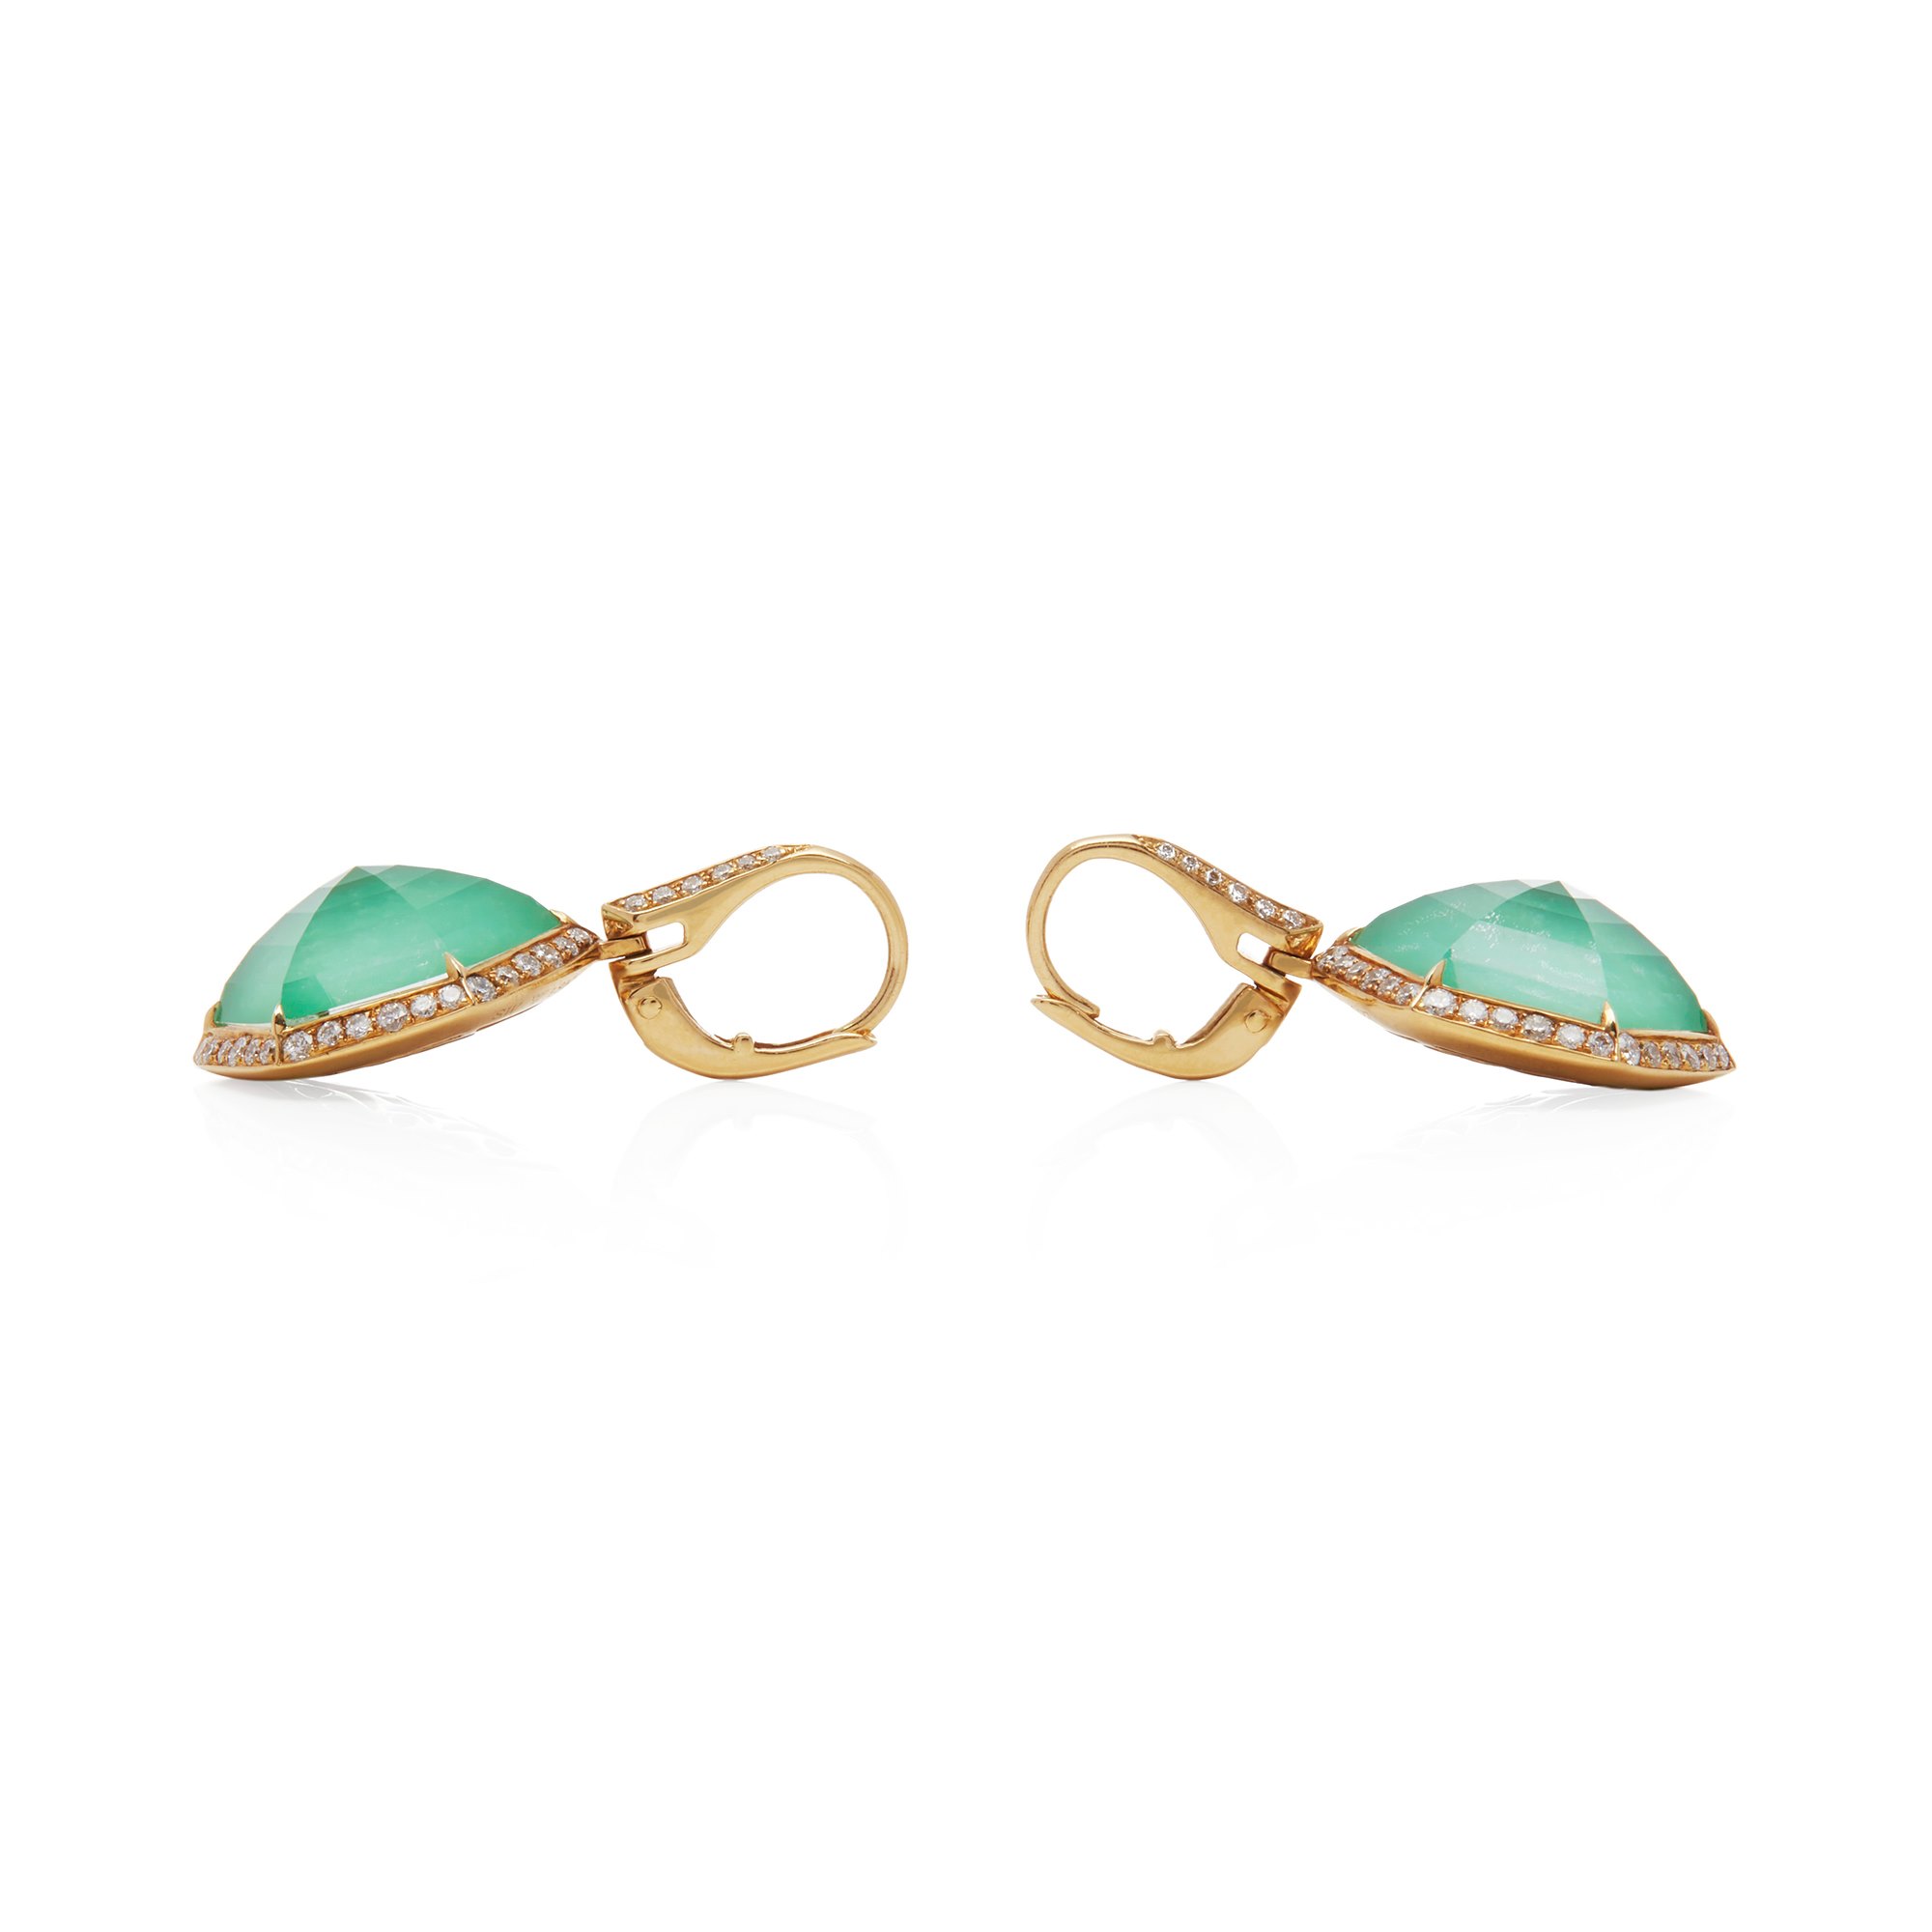 Stephen Webster 18ct Yellow Gold Deco Haze Green Agate and Diamond Drop Earrings